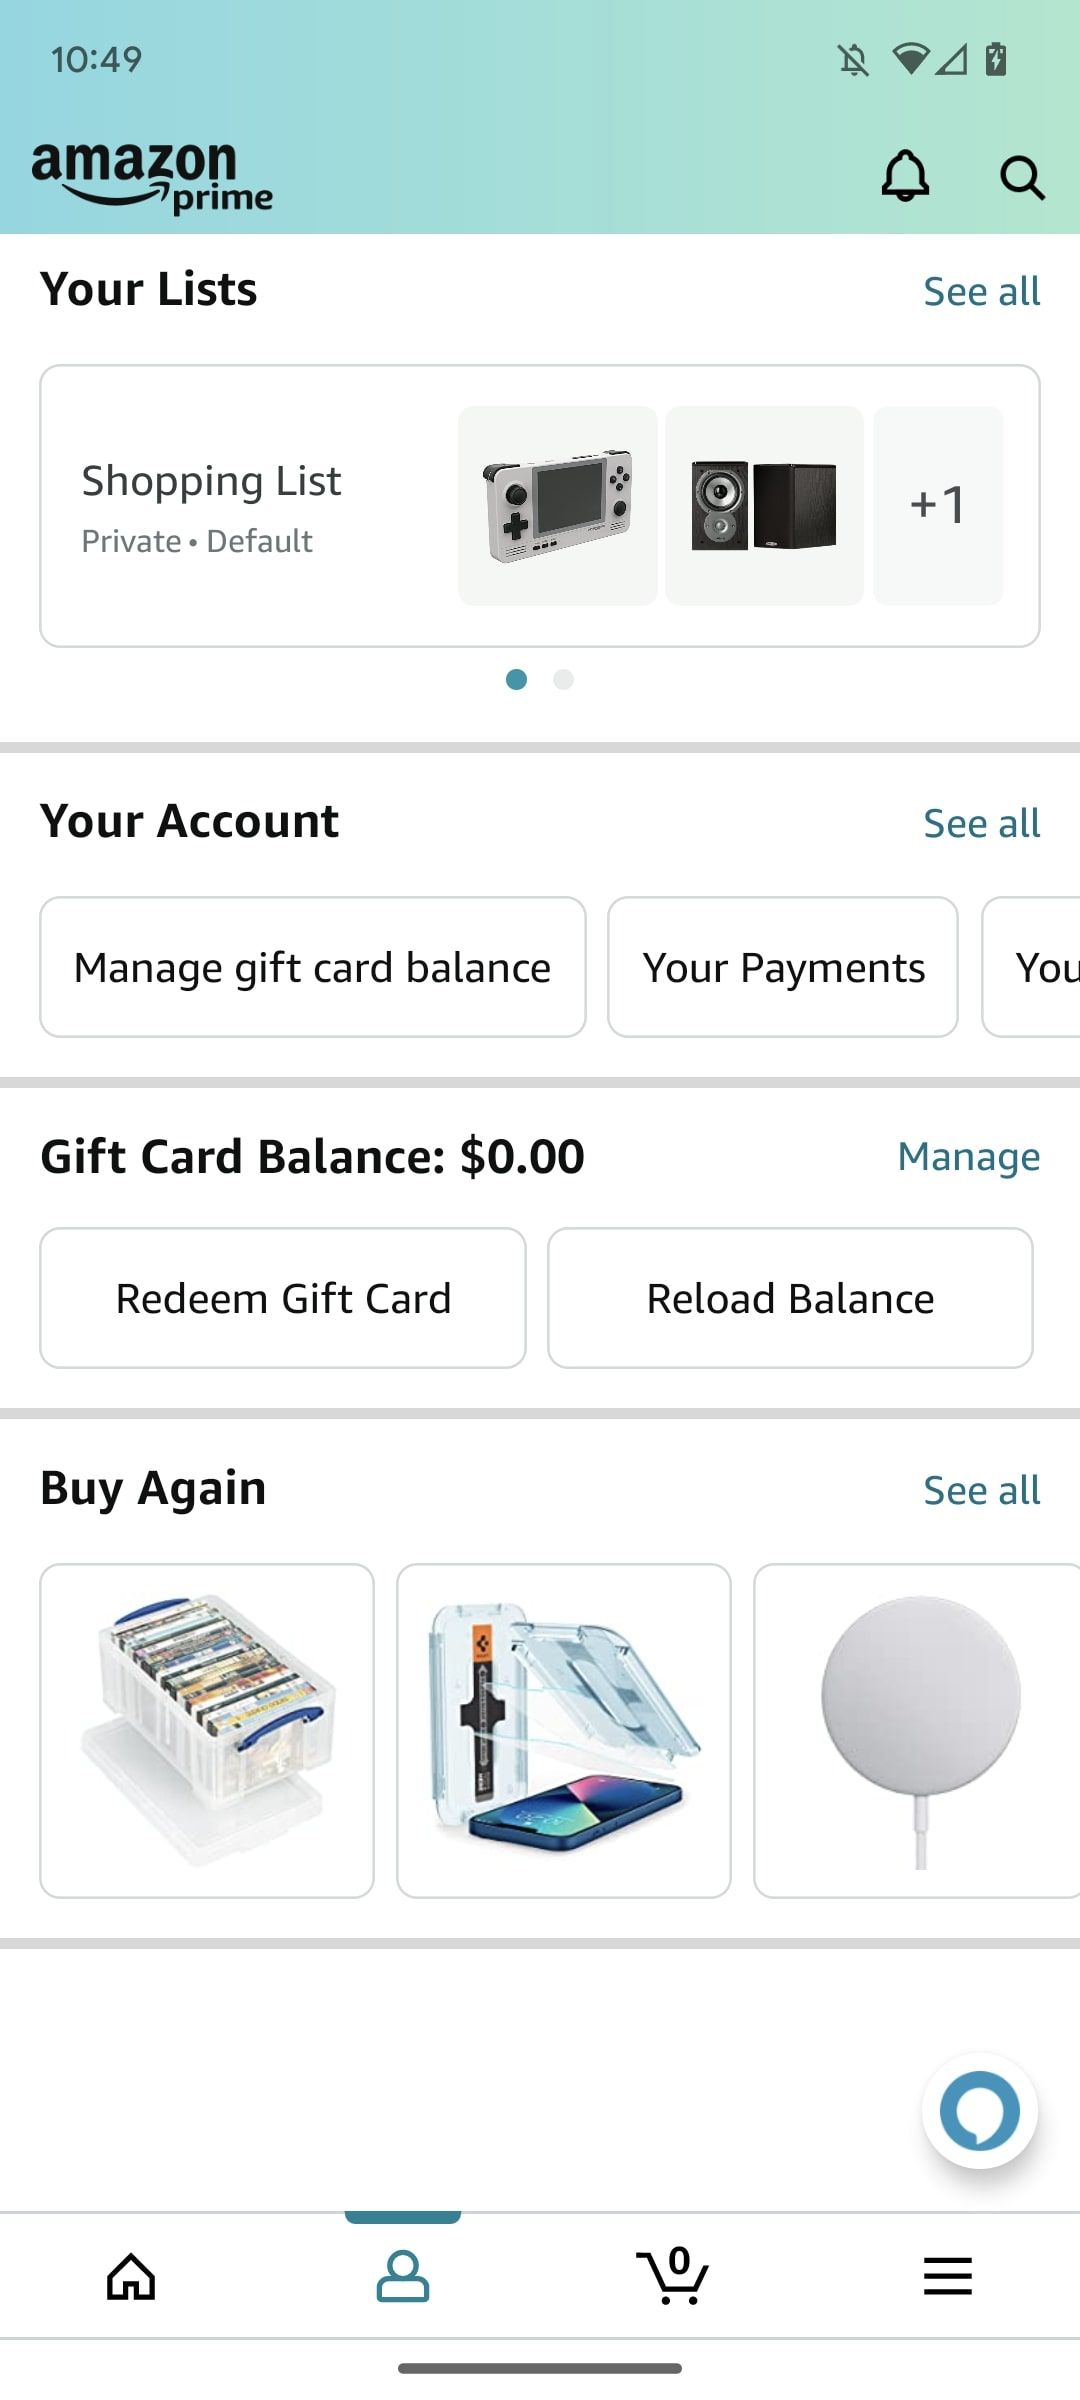 Can You Use Amazon Gift Cards in New Zealand? mumsmoney.co.nz